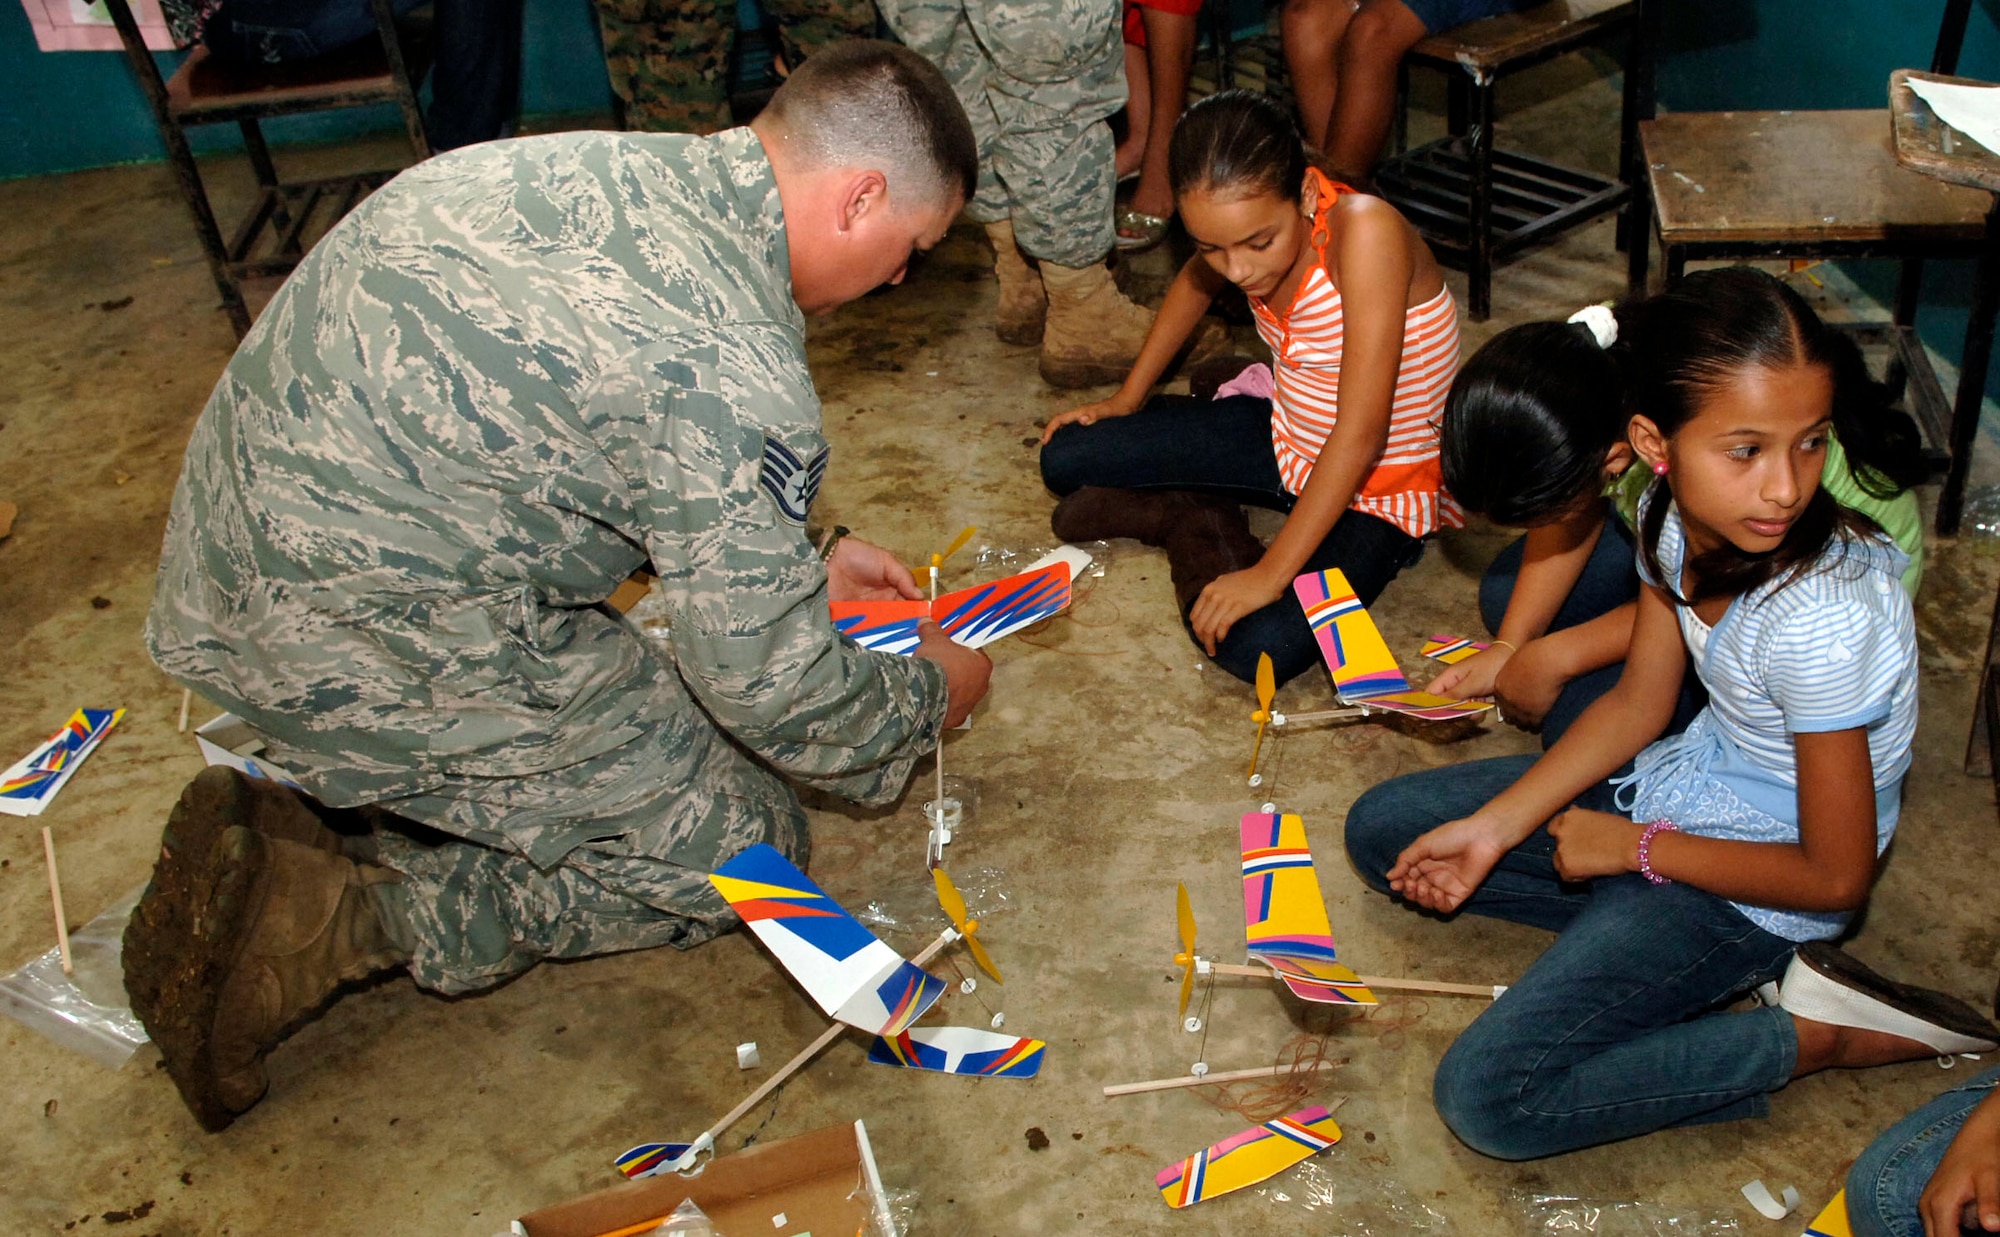 Staff Sgt. Josh Lazarski, 820th Expeditionary RED HORSE Squadron, helps children assemble rubber band airplanes at the Sansonsito School July 12. (U.S. Air Force photo/Tech. Sgt. Eric Petosky)